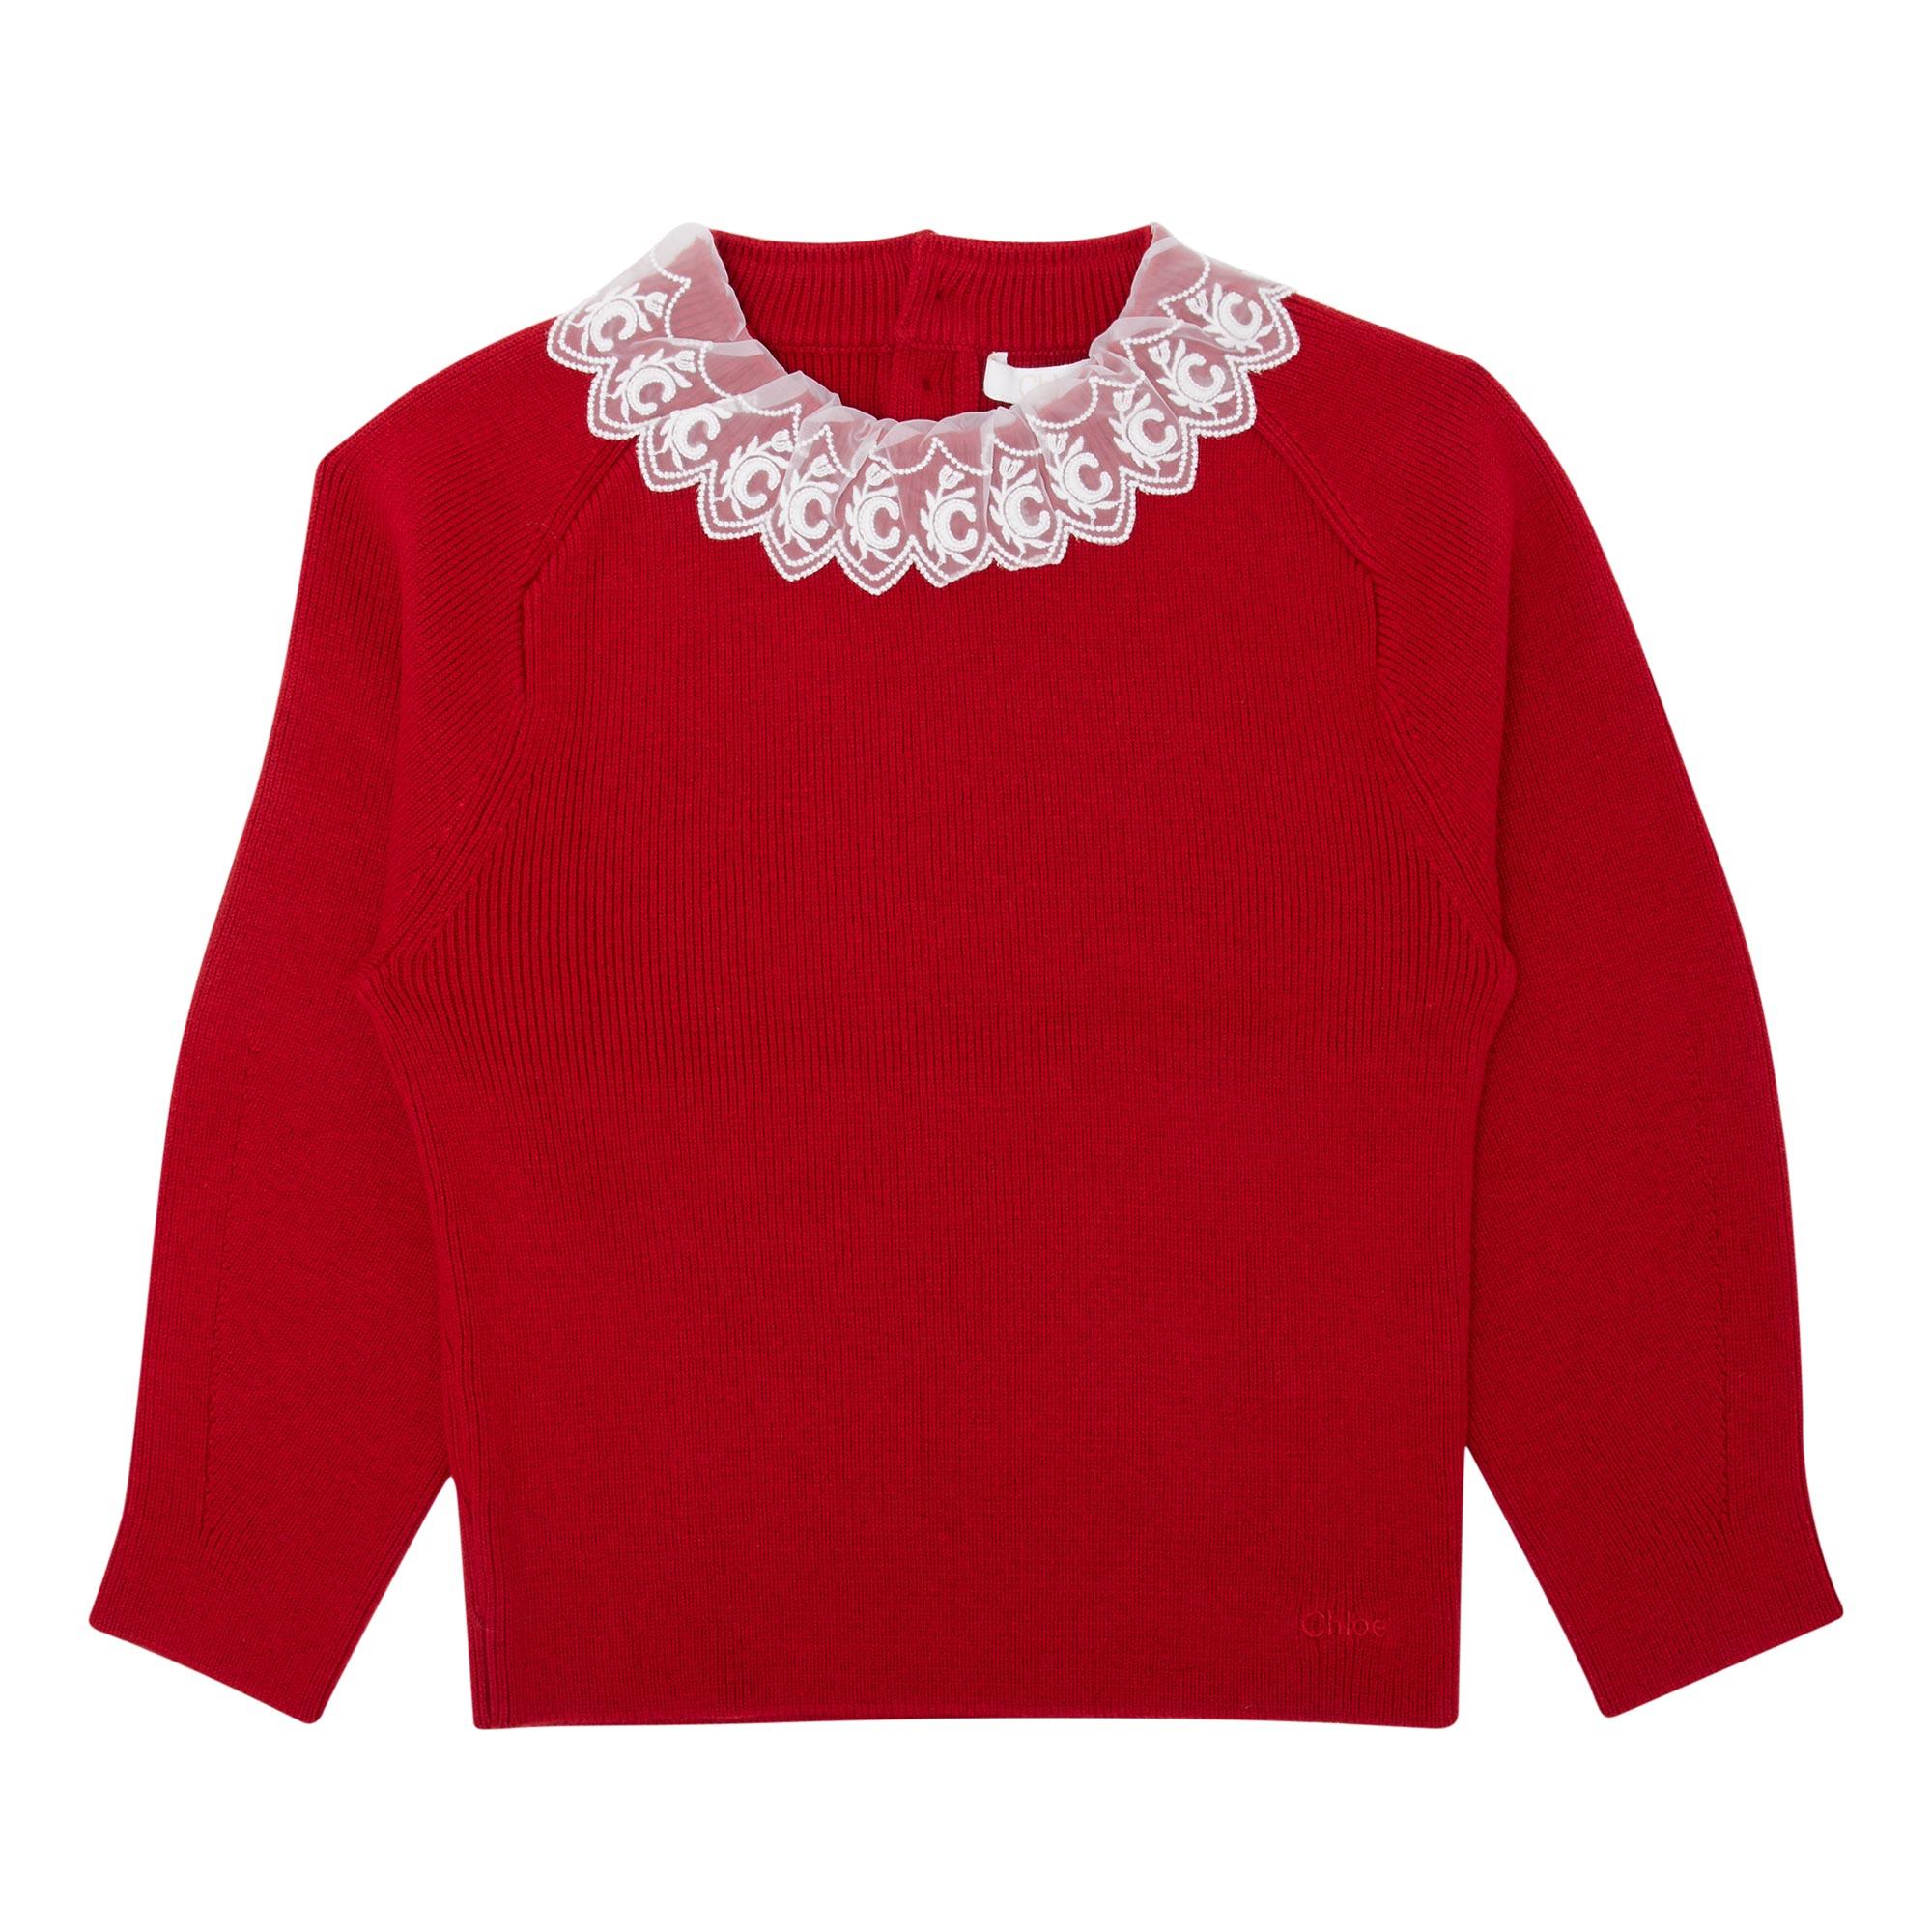 Lace Neckline Knitted Sweater